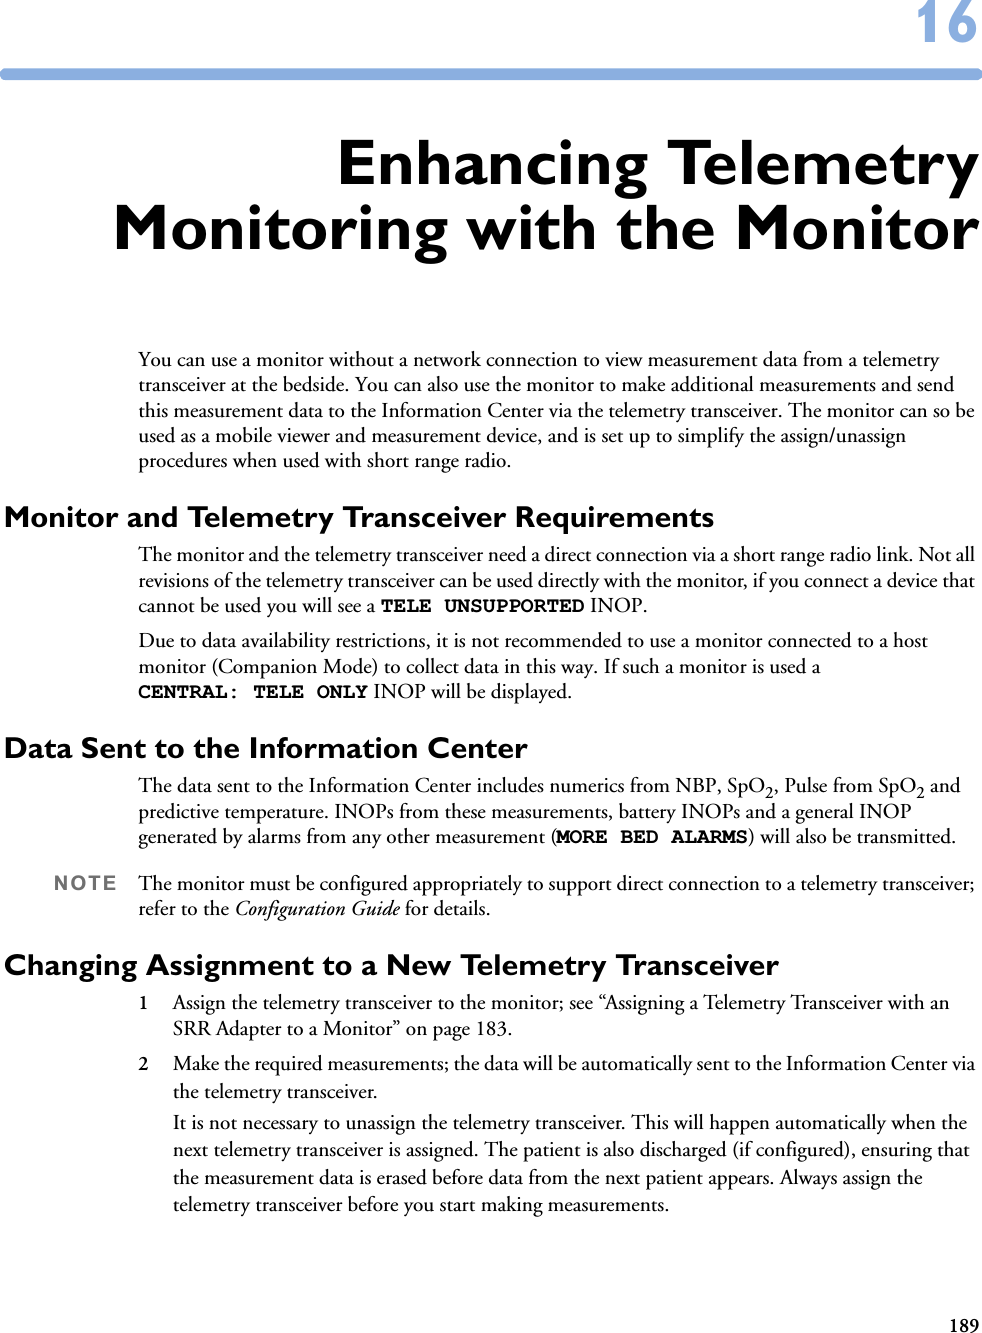 1891616Enhancing TelemetryMonitoring with the MonitorYou can use a monitor without a network connection to view measurement data from a telemetry transceiver at the bedside. You can also use the monitor to make additional measurements and send this measurement data to the Information Center via the telemetry transceiver. The monitor can so be used as a mobile viewer and measurement device, and is set up to simplify the assign/unassign procedures when used with short range radio. Monitor and Telemetry Transceiver RequirementsThe monitor and the telemetry transceiver need a direct connection via a short range radio link. Not all revisions of the telemetry transceiver can be used directly with the monitor, if you connect a device that cannot be used you will see a TELE UNSUPPORTED INOP. Due to data availability restrictions, it is not recommended to use a monitor connected to a host monitor (Companion Mode) to collect data in this way. If such a monitor is used a CENTRAL: TELE ONLY INOP will be displayed.Data Sent to the Information CenterThe data sent to the Information Center includes numerics from NBP, SpO2, Pulse from SpO2 and predictive temperature. INOPs from these measurements, battery INOPs and a general INOP generated by alarms from any other measurement (MORE BED ALARMS) will also be transmitted.NOTE The monitor must be configured appropriately to support direct connection to a telemetry transceiver; refer to the Configuration Guide for details.Changing Assignment to a New Telemetry Transceiver1Assign the telemetry transceiver to the monitor; see “Assigning a Telemetry Transceiver with an SRR Adapter to a Monitor” on page 183. 2Make the required measurements; the data will be automatically sent to the Information Center via the telemetry transceiver. It is not necessary to unassign the telemetry transceiver. This will happen automatically when the next telemetry transceiver is assigned. The patient is also discharged (if configured), ensuring that the measurement data is erased before data from the next patient appears. Always assign the telemetry transceiver before you start making measurements. 